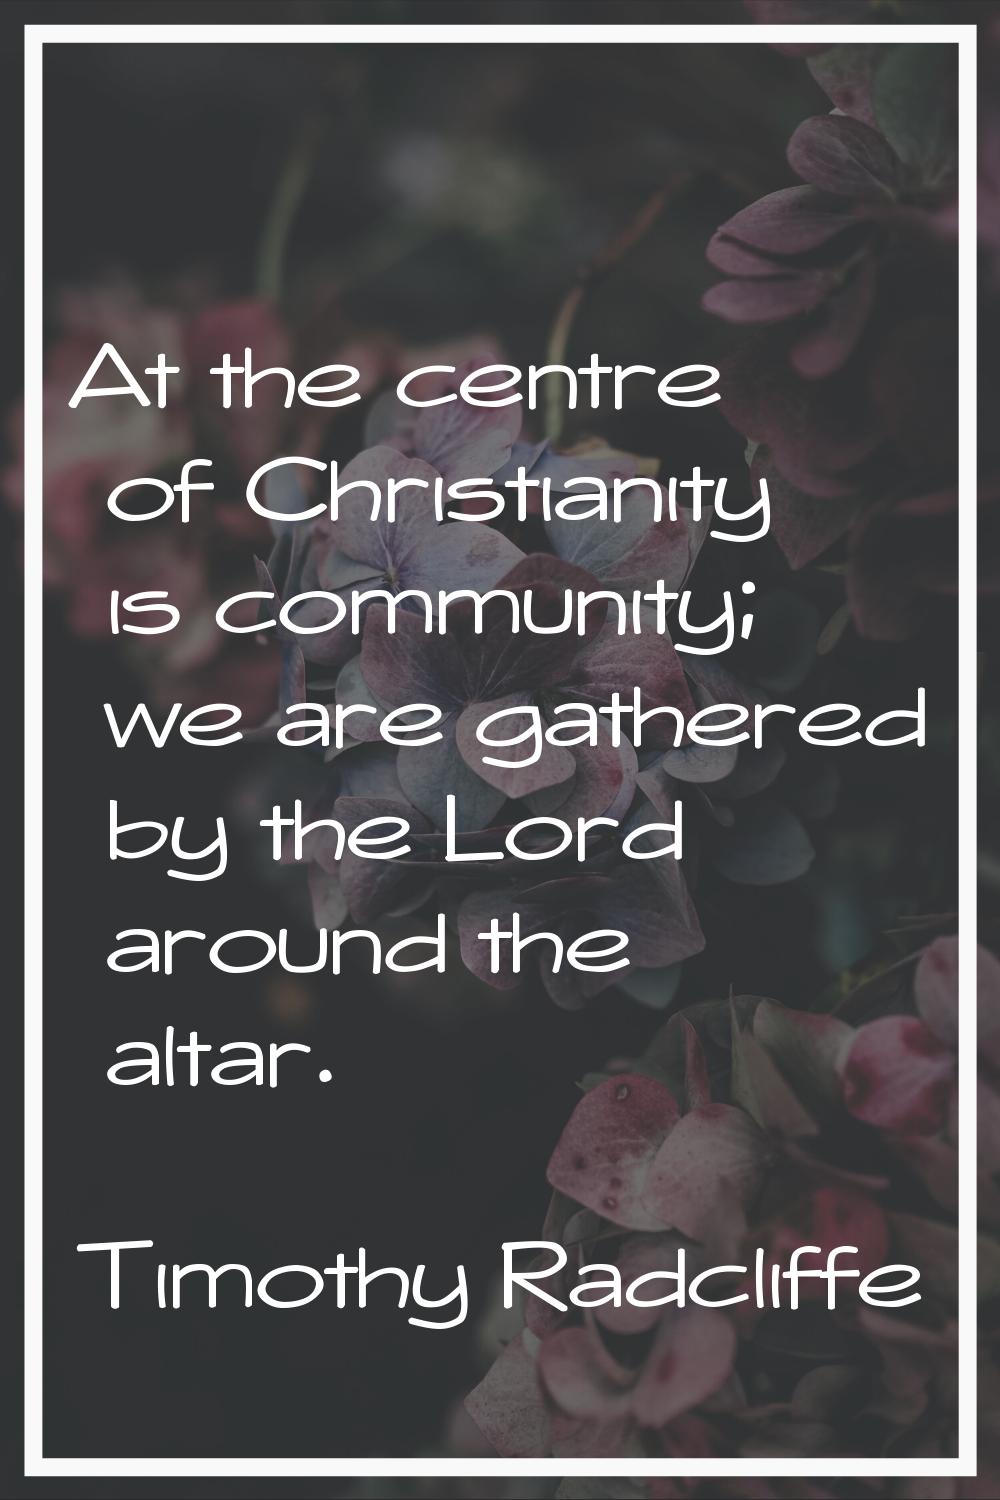 At the centre of Christianity is community; we are gathered by the Lord around the altar.